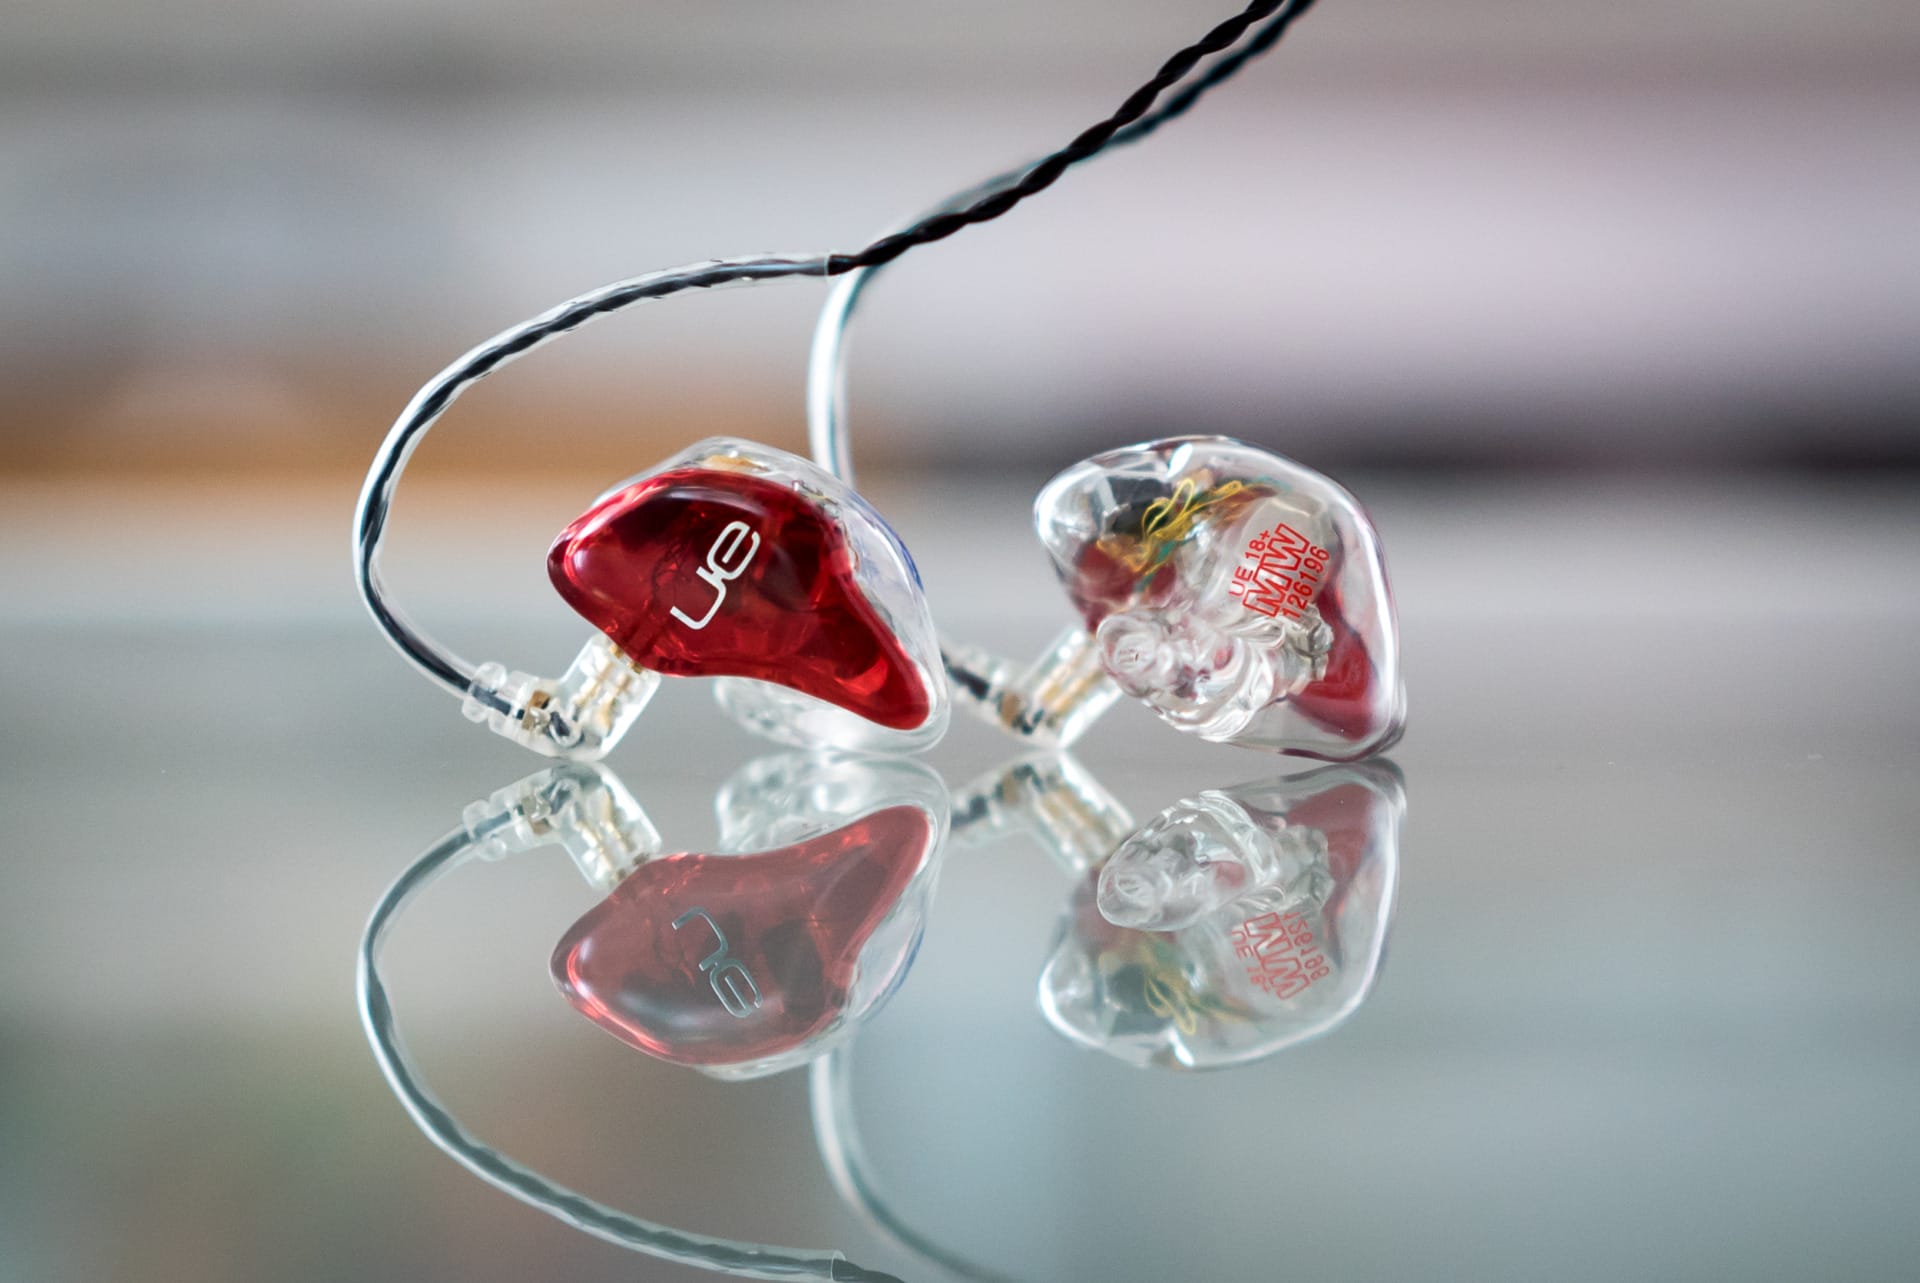 Is It Possible to Customize the Fit of Earbuds?